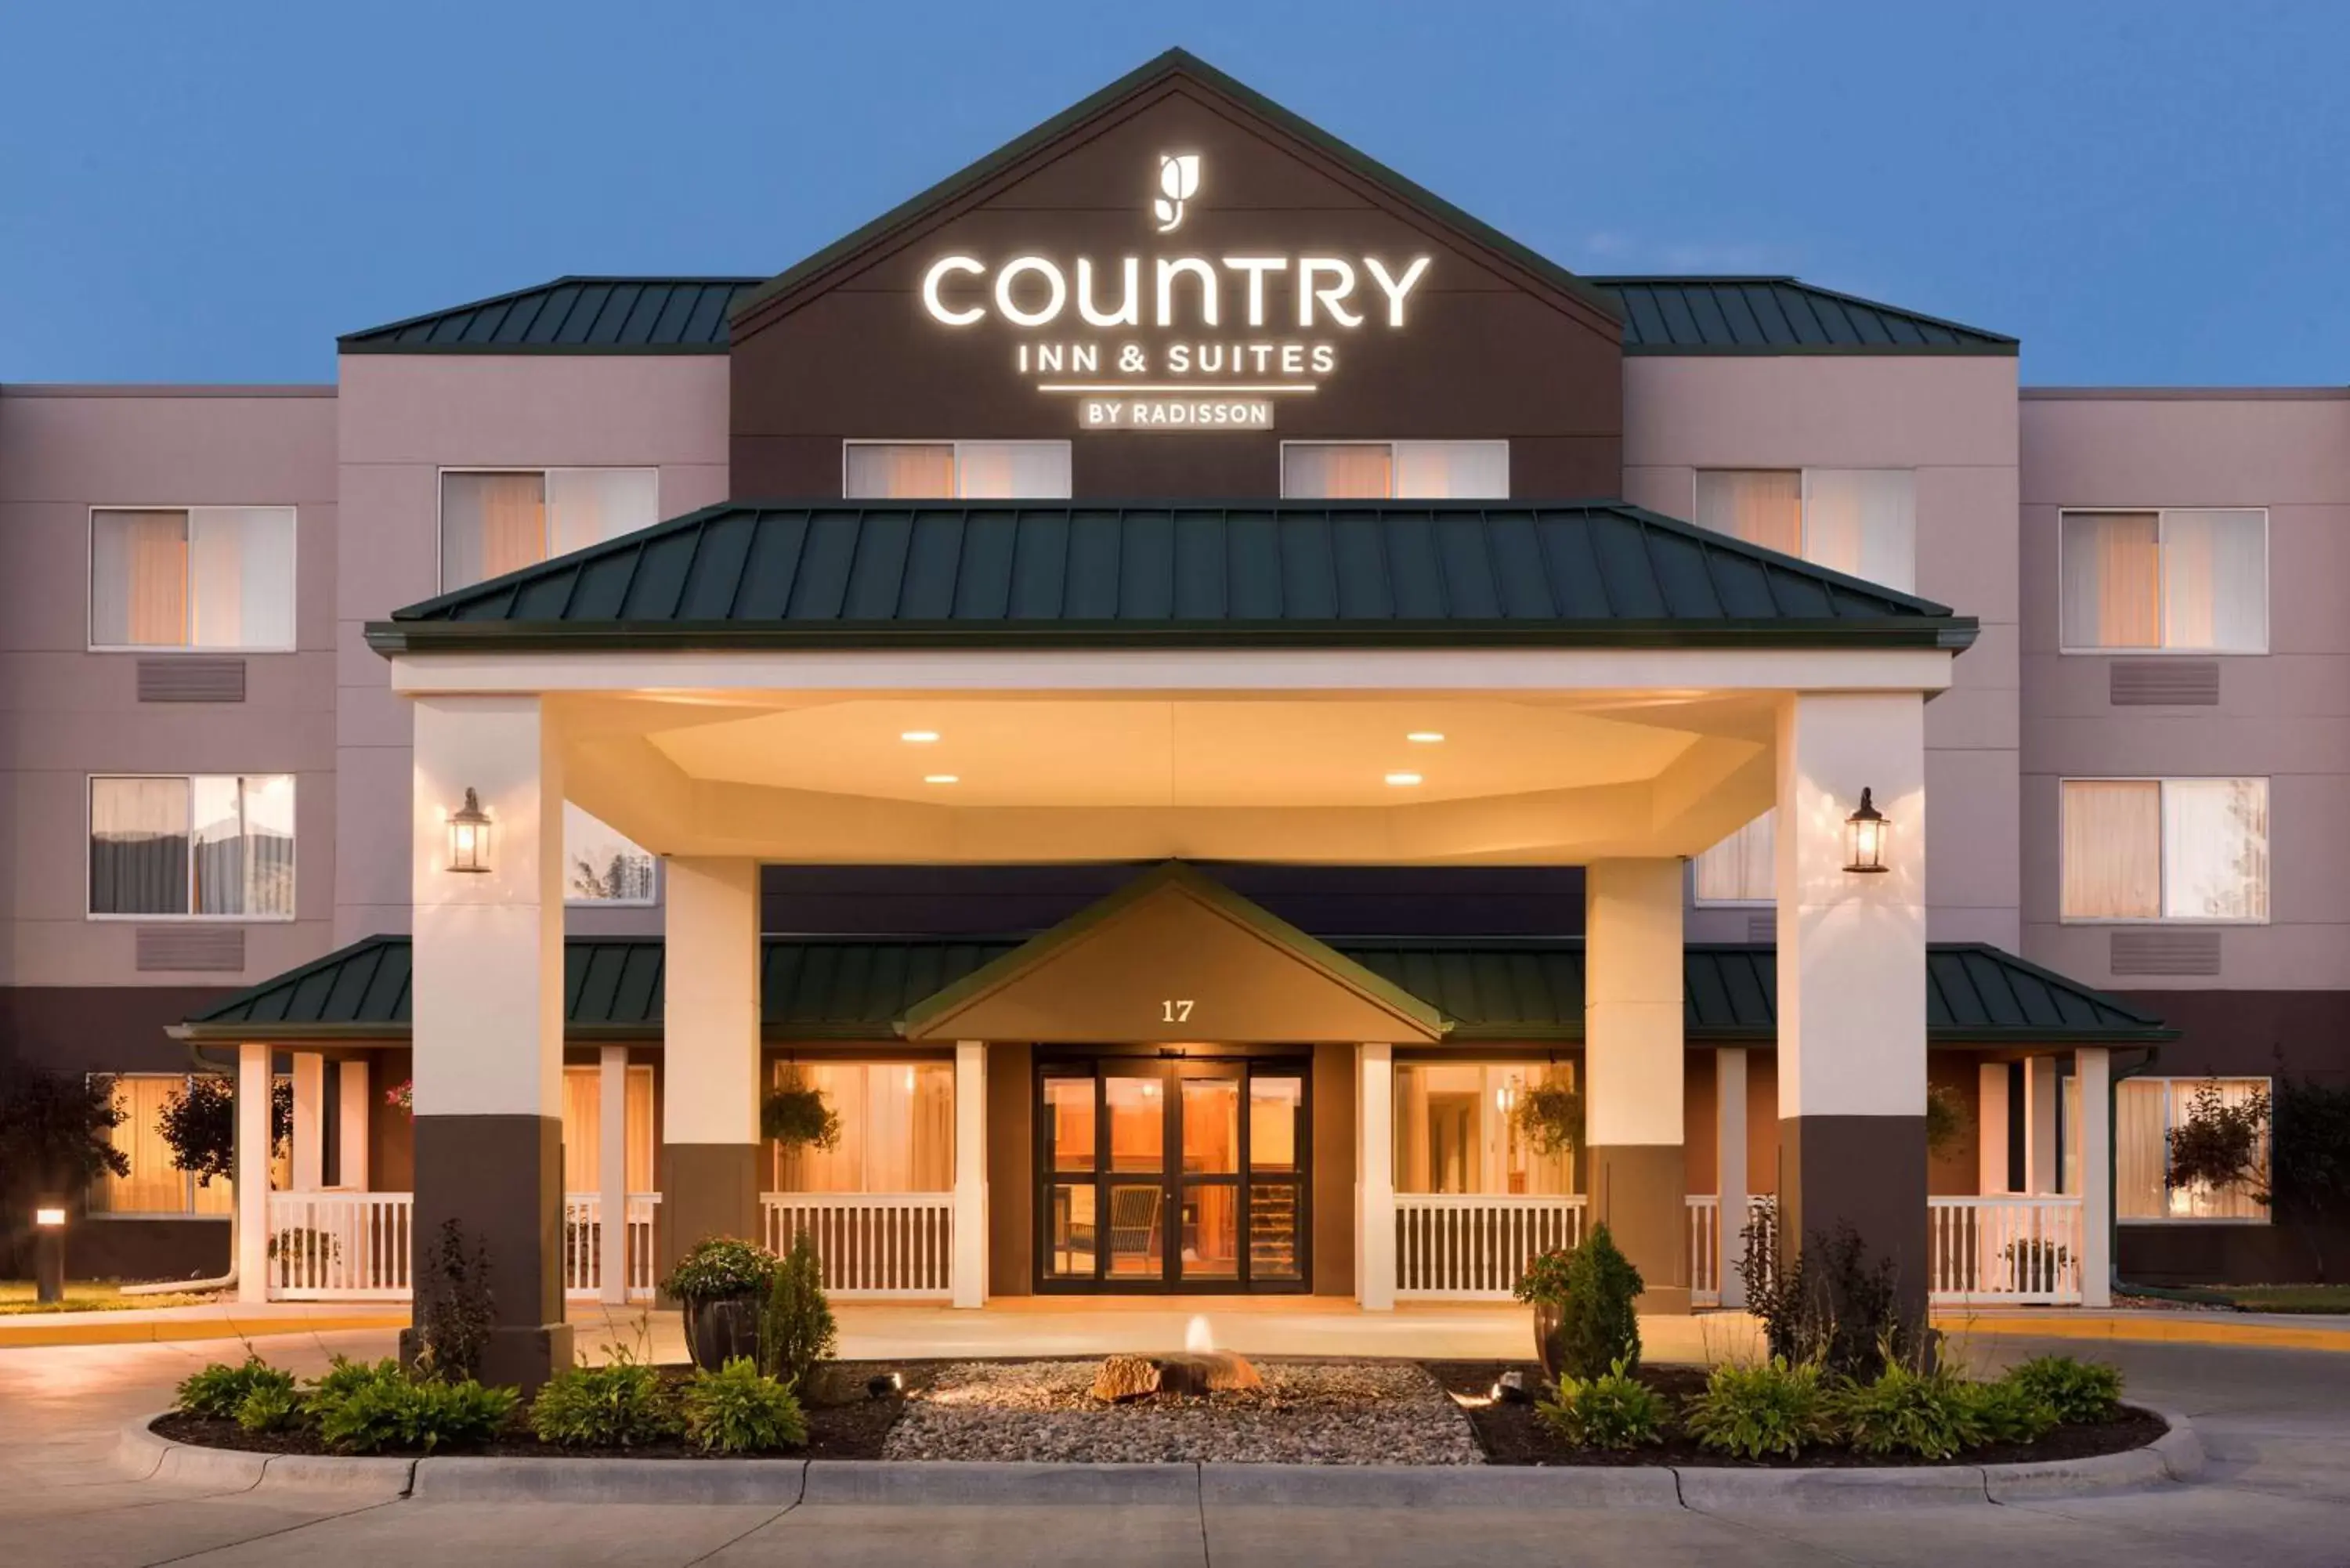 Property building in Country Inn & Suites by Radisson, Council Bluffs, IA